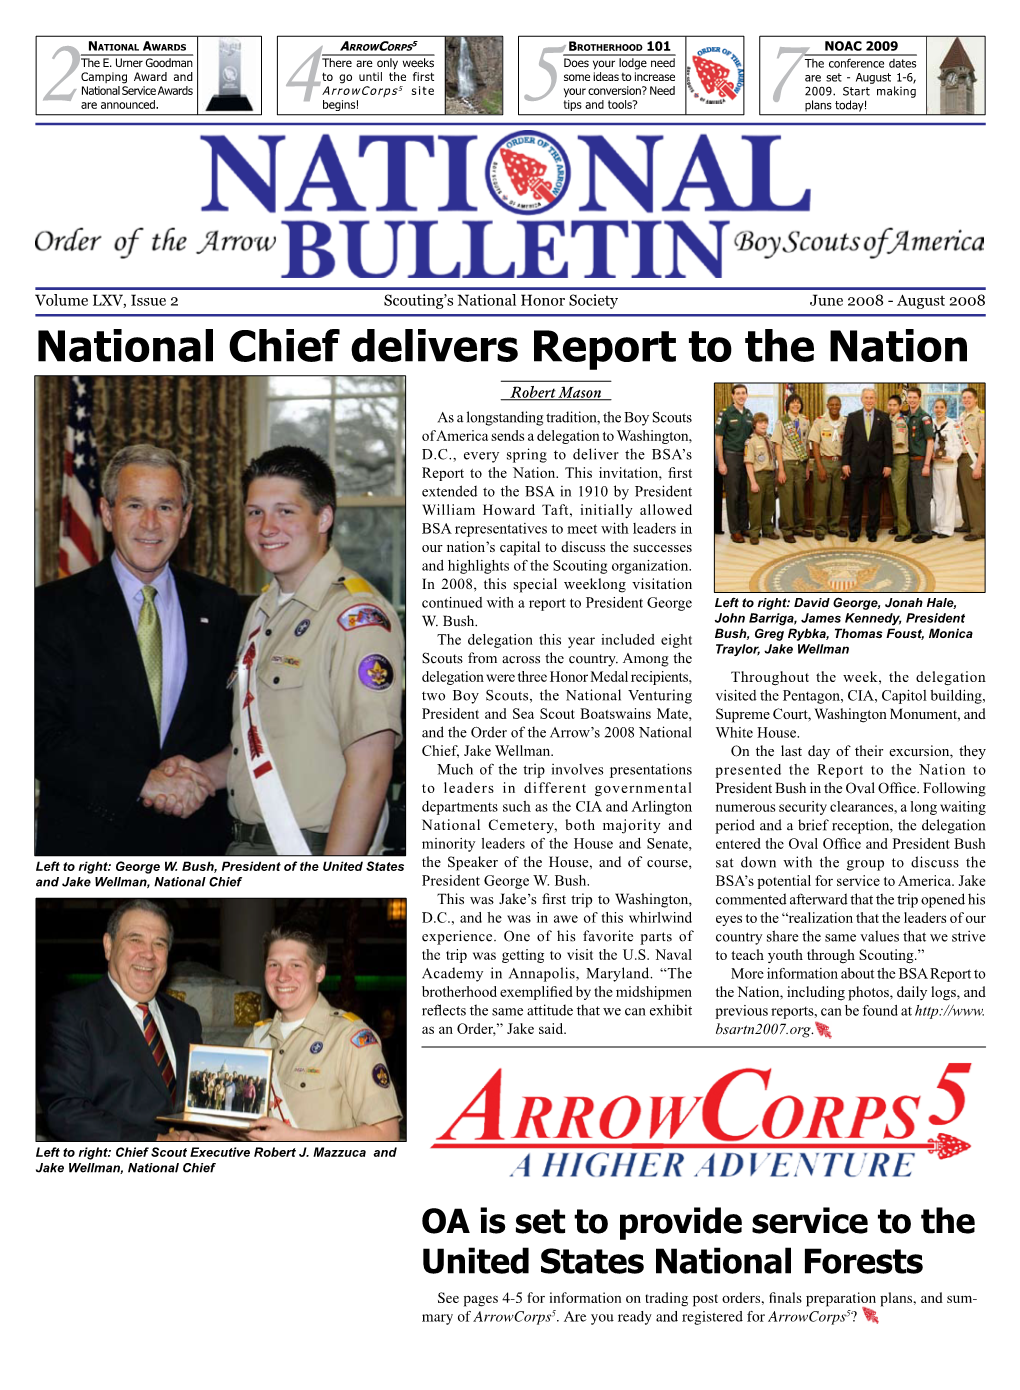 National Chief Delivers Report to the Nation